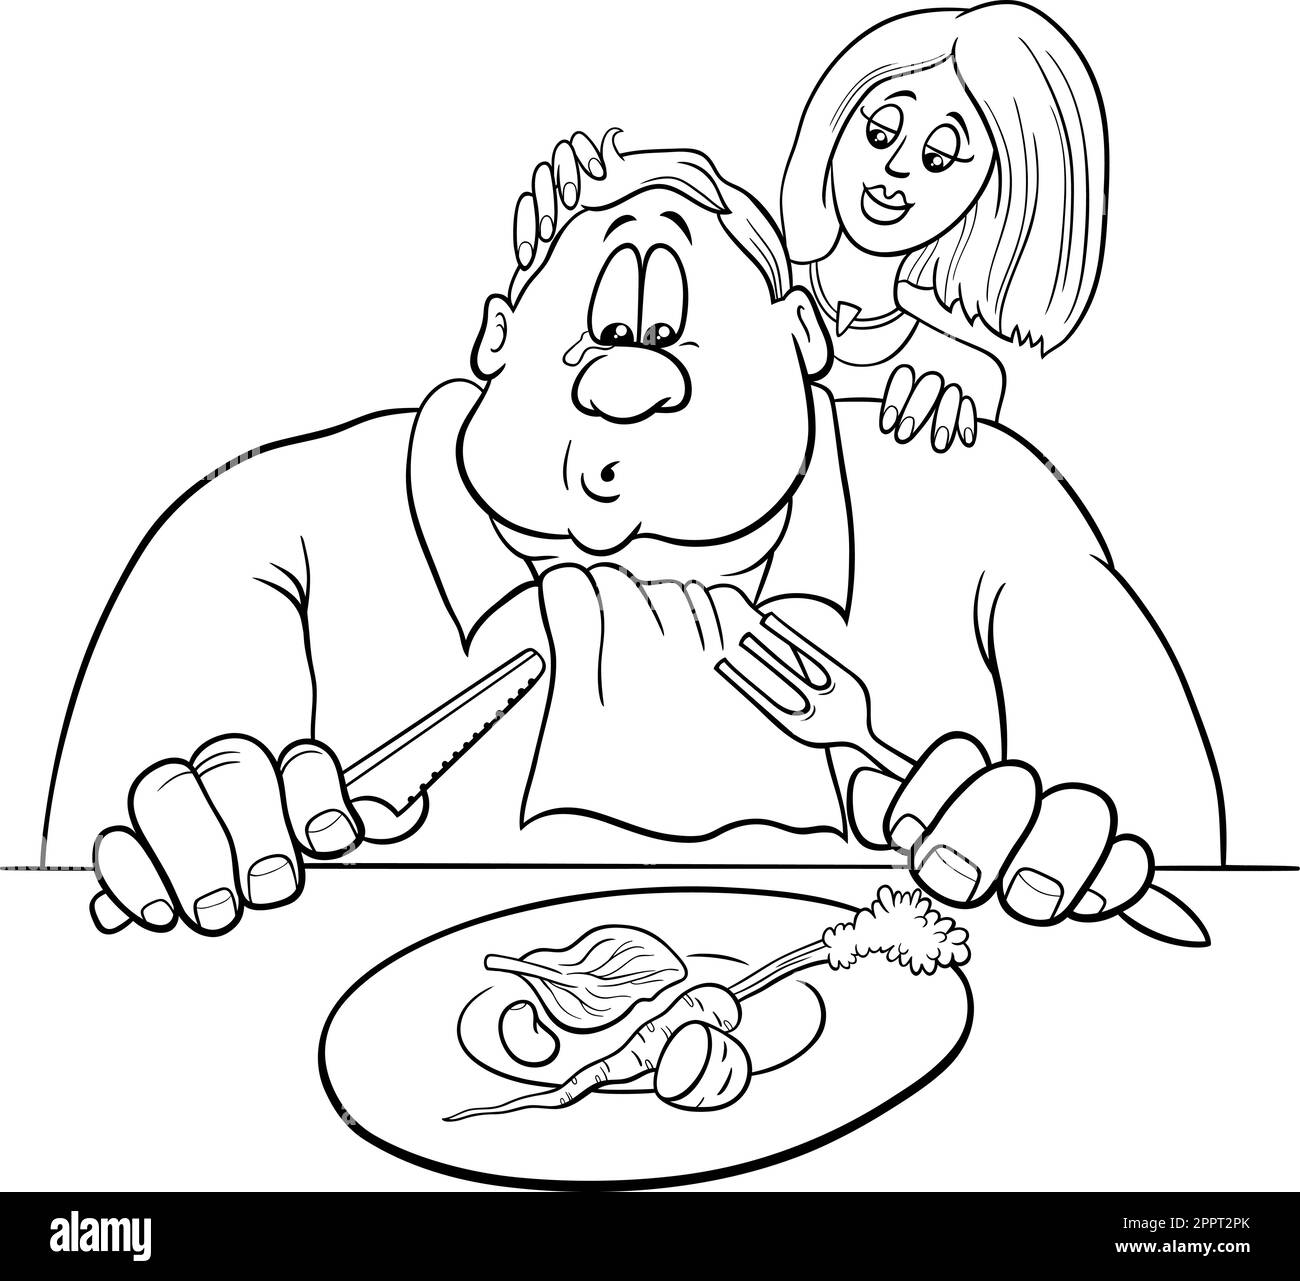 cartoon sad man on a diet humor illustration coloring page Stock Vector